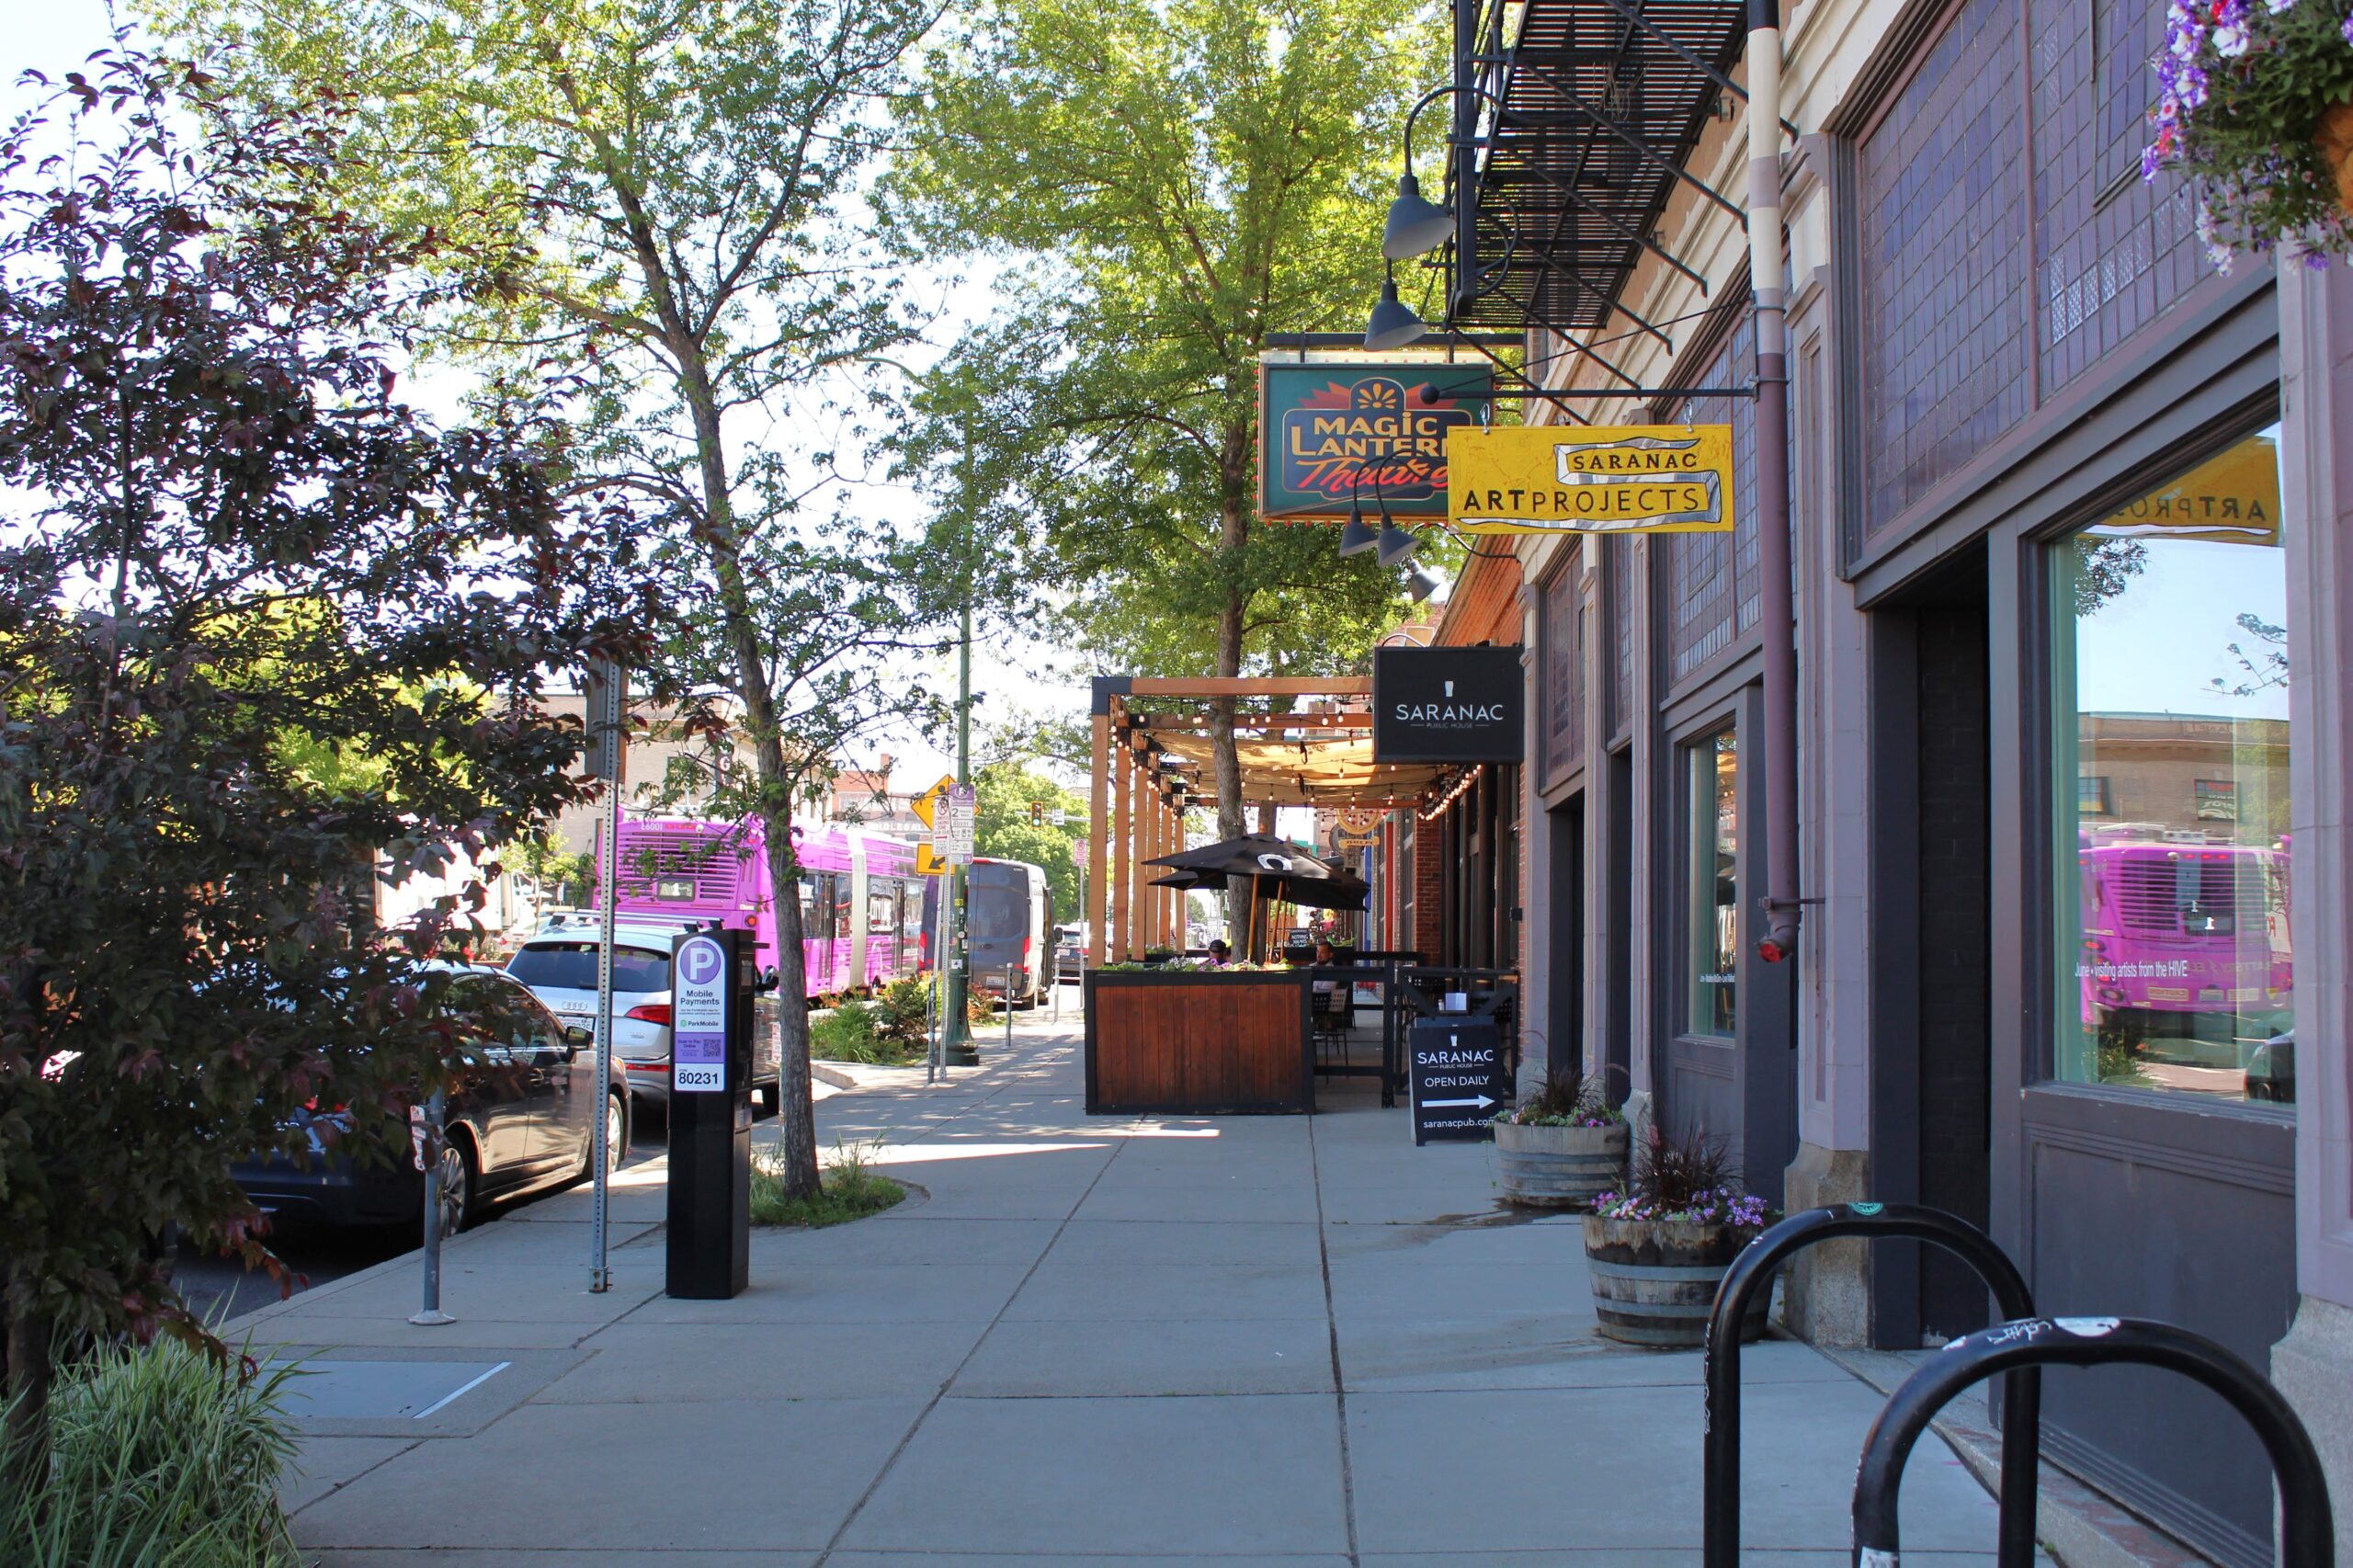 Streetscape of the Saranac Commons in Spokane. A pink CityLine bus runs in the background and small business signs hang in the foreground.